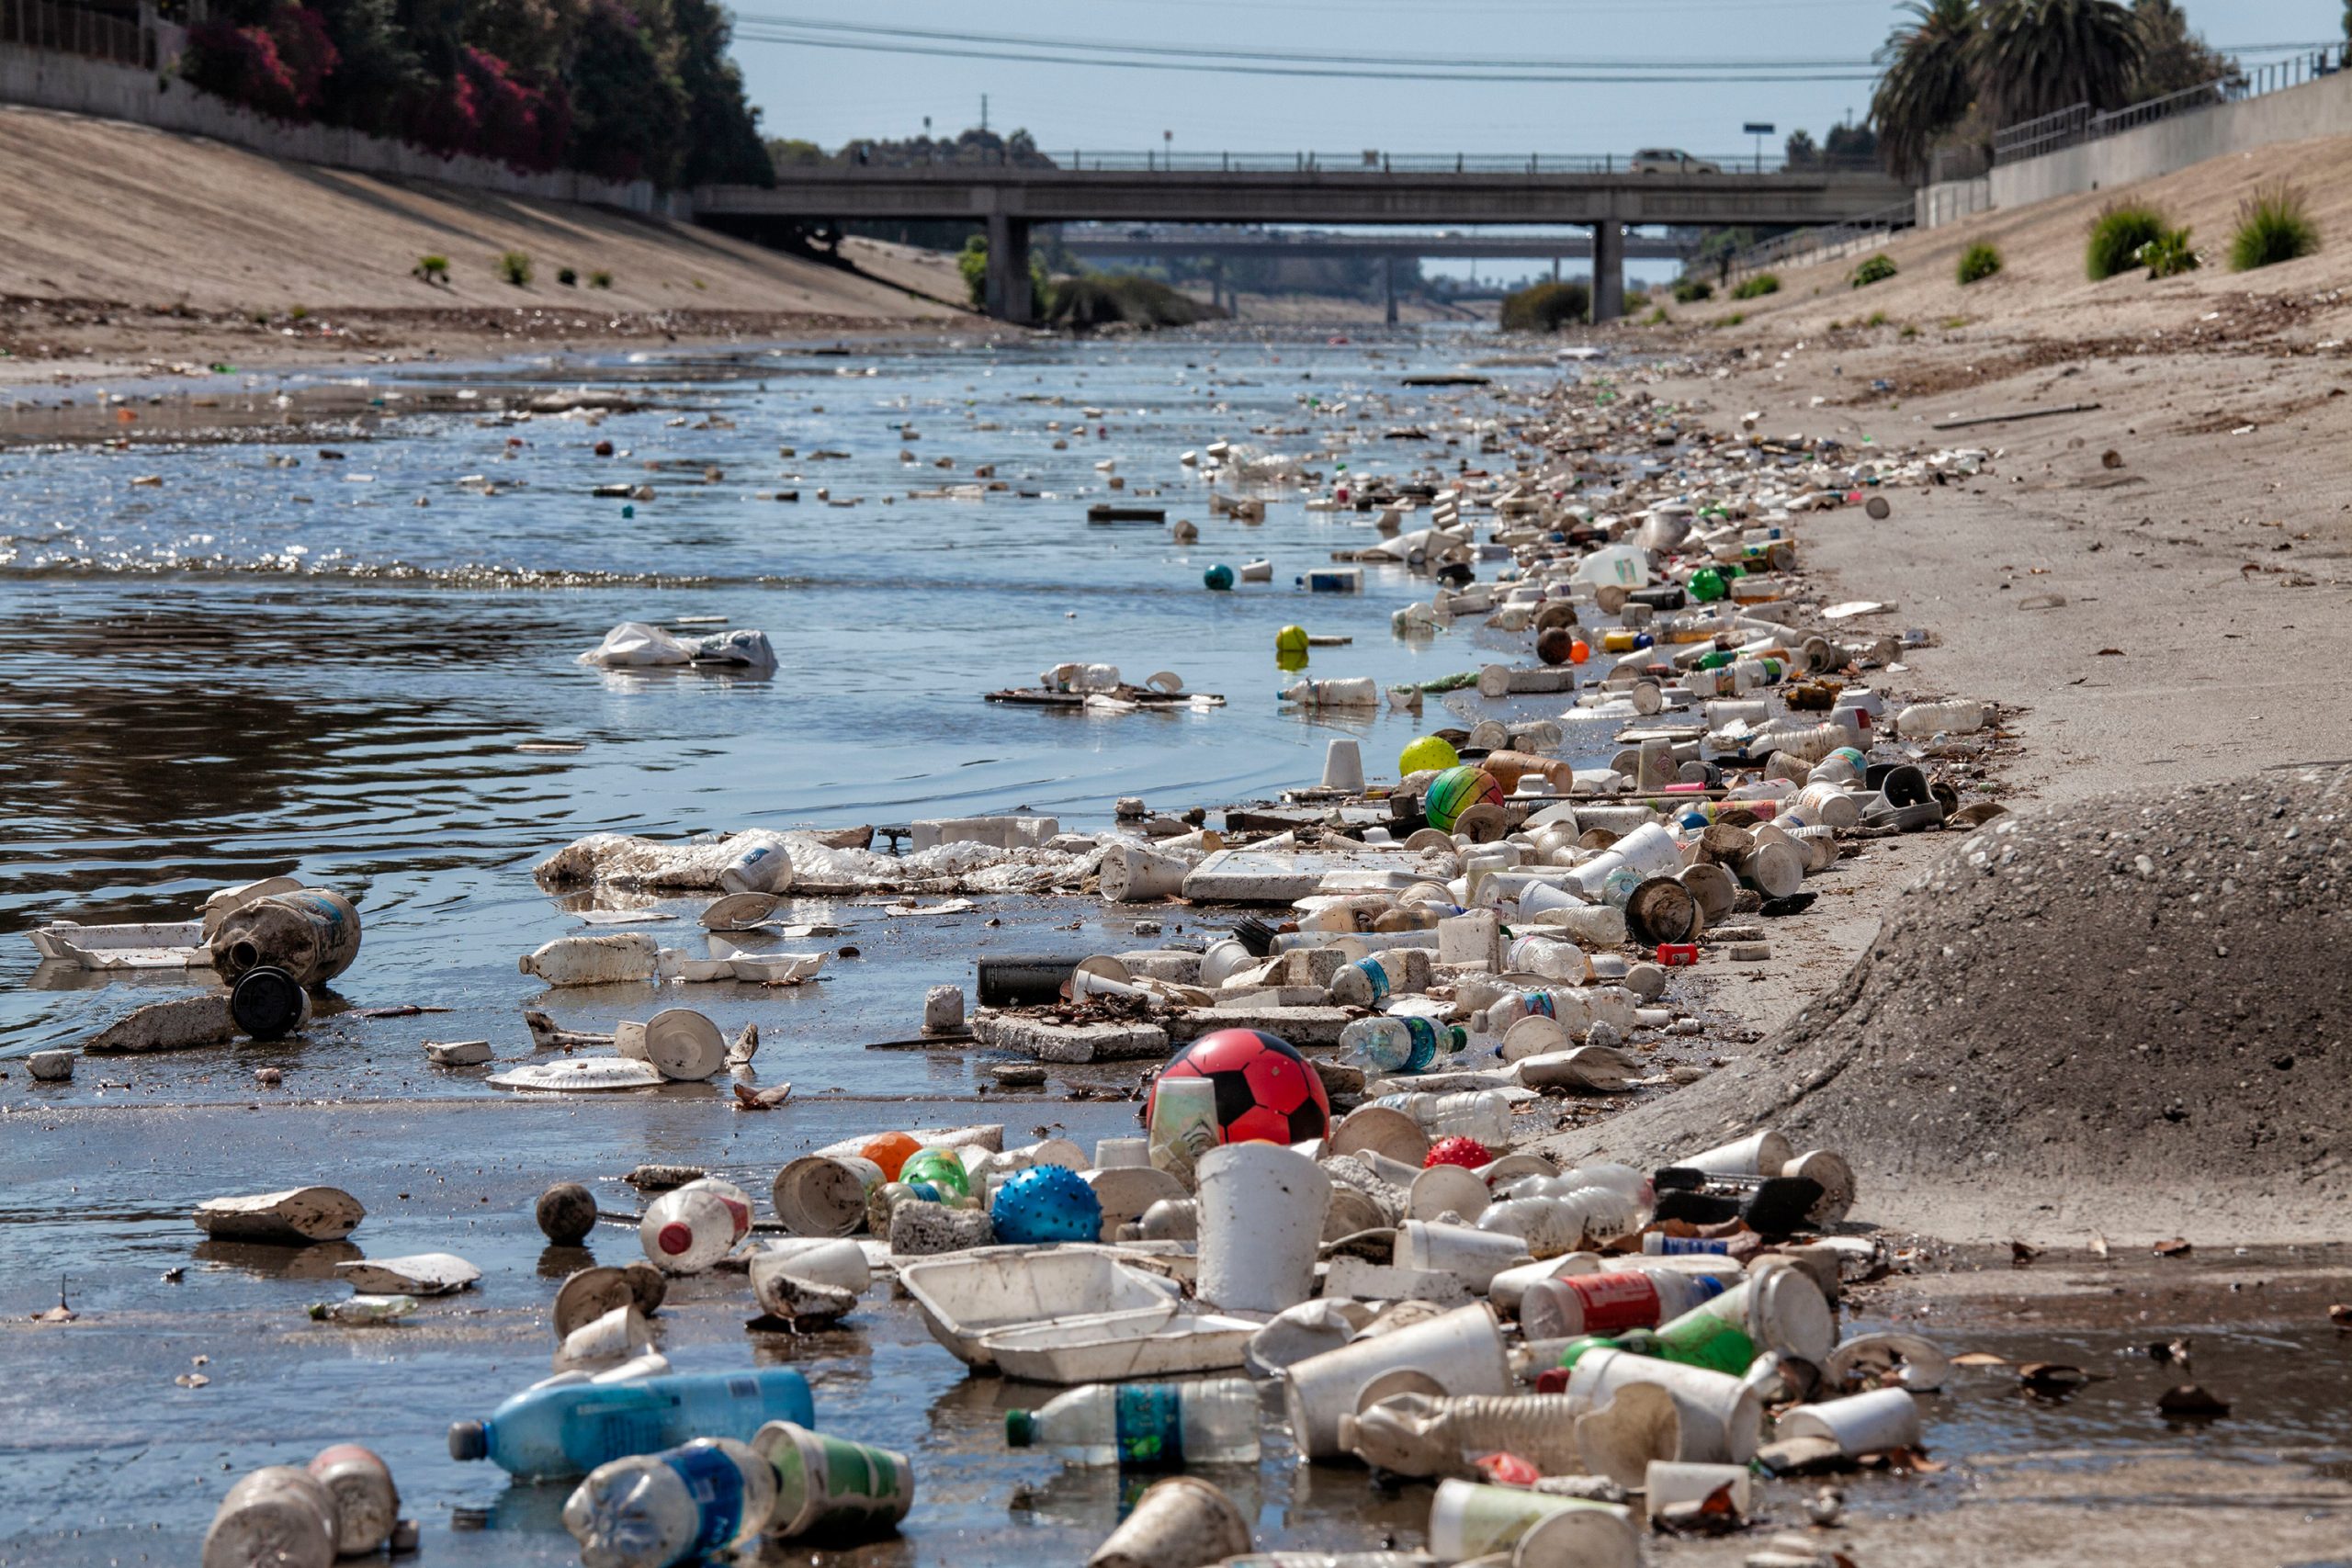 Large amounts of trash and plastic refuse collect in Ballona Creek after first major rain storm, Cu...